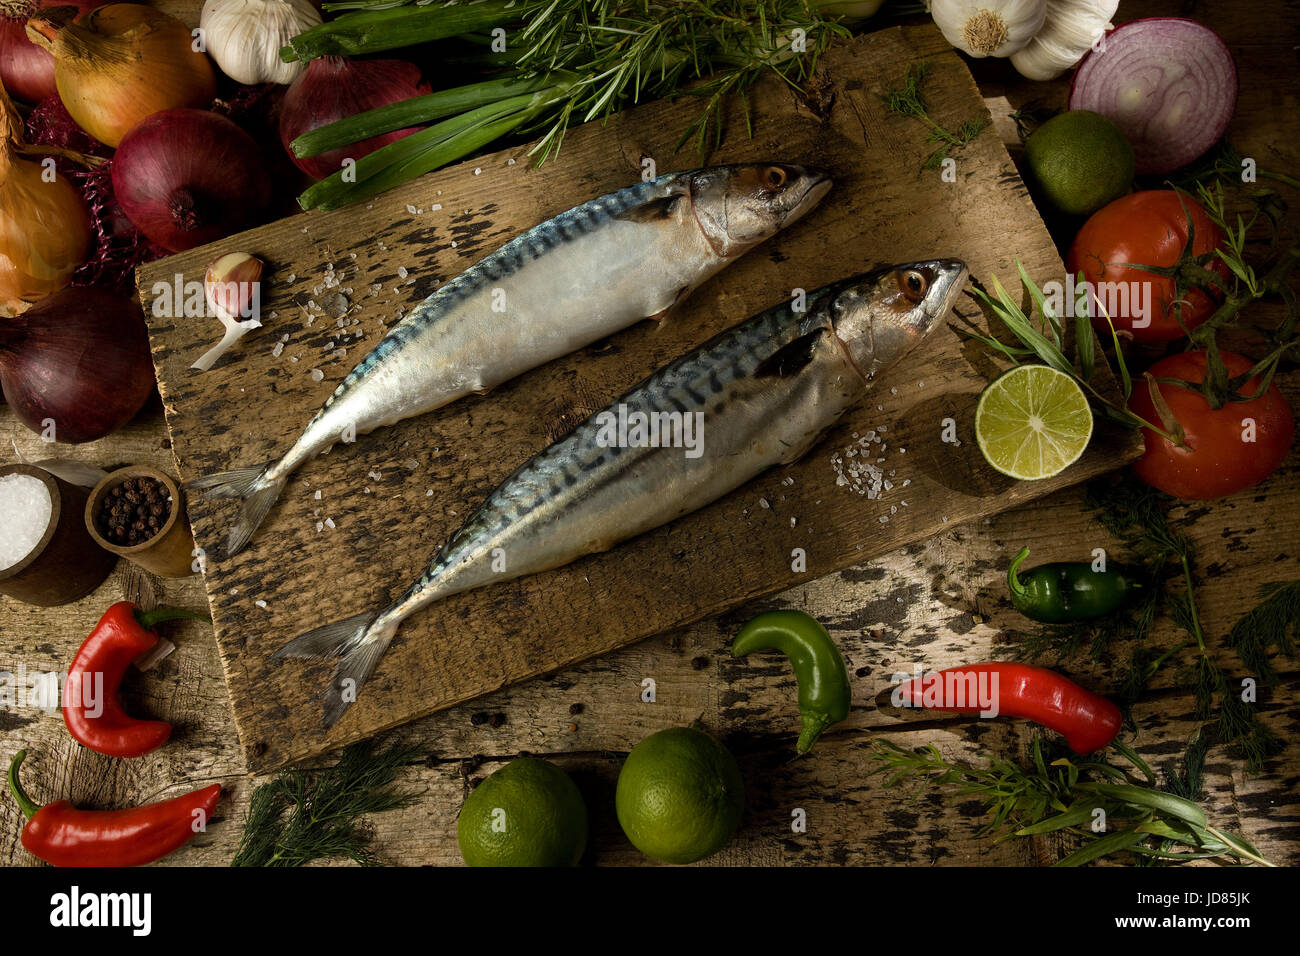 Two whole uncooked mackerel with raw ingredients Stock Photo